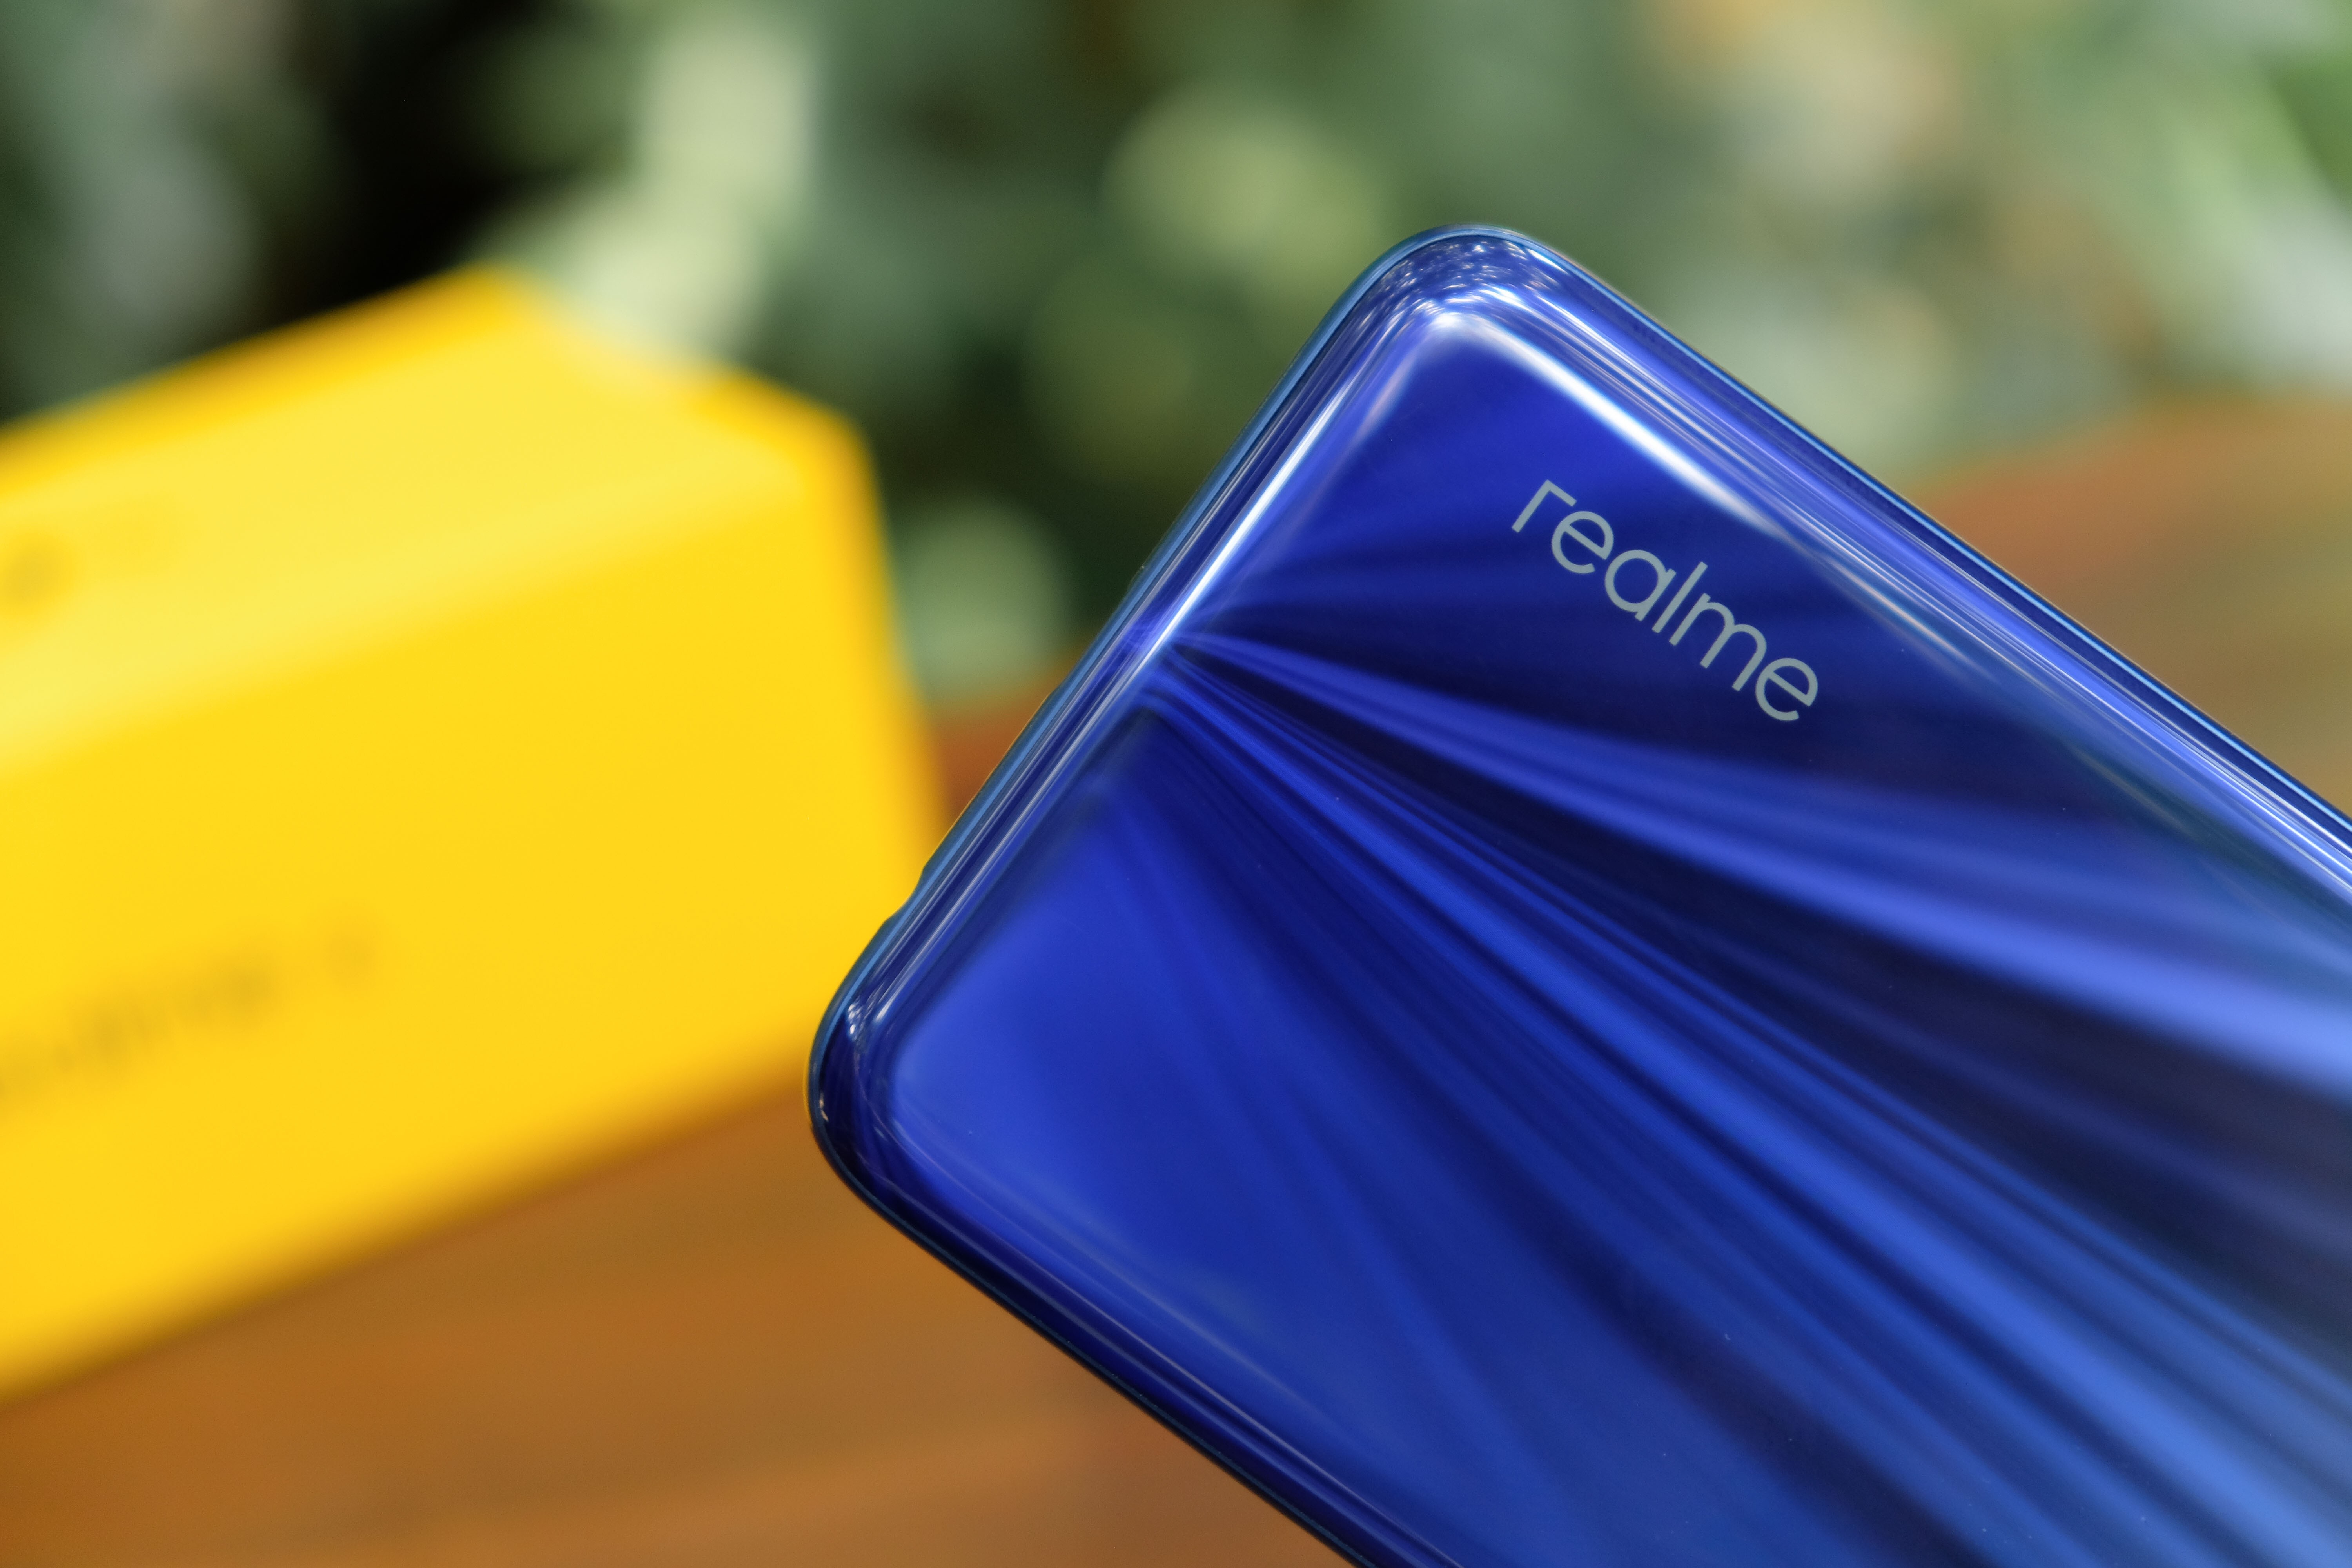 The Realme 6 smartphone as seen in Bangkok, Thailand on March 19, 2020. Photo: Shutterstock